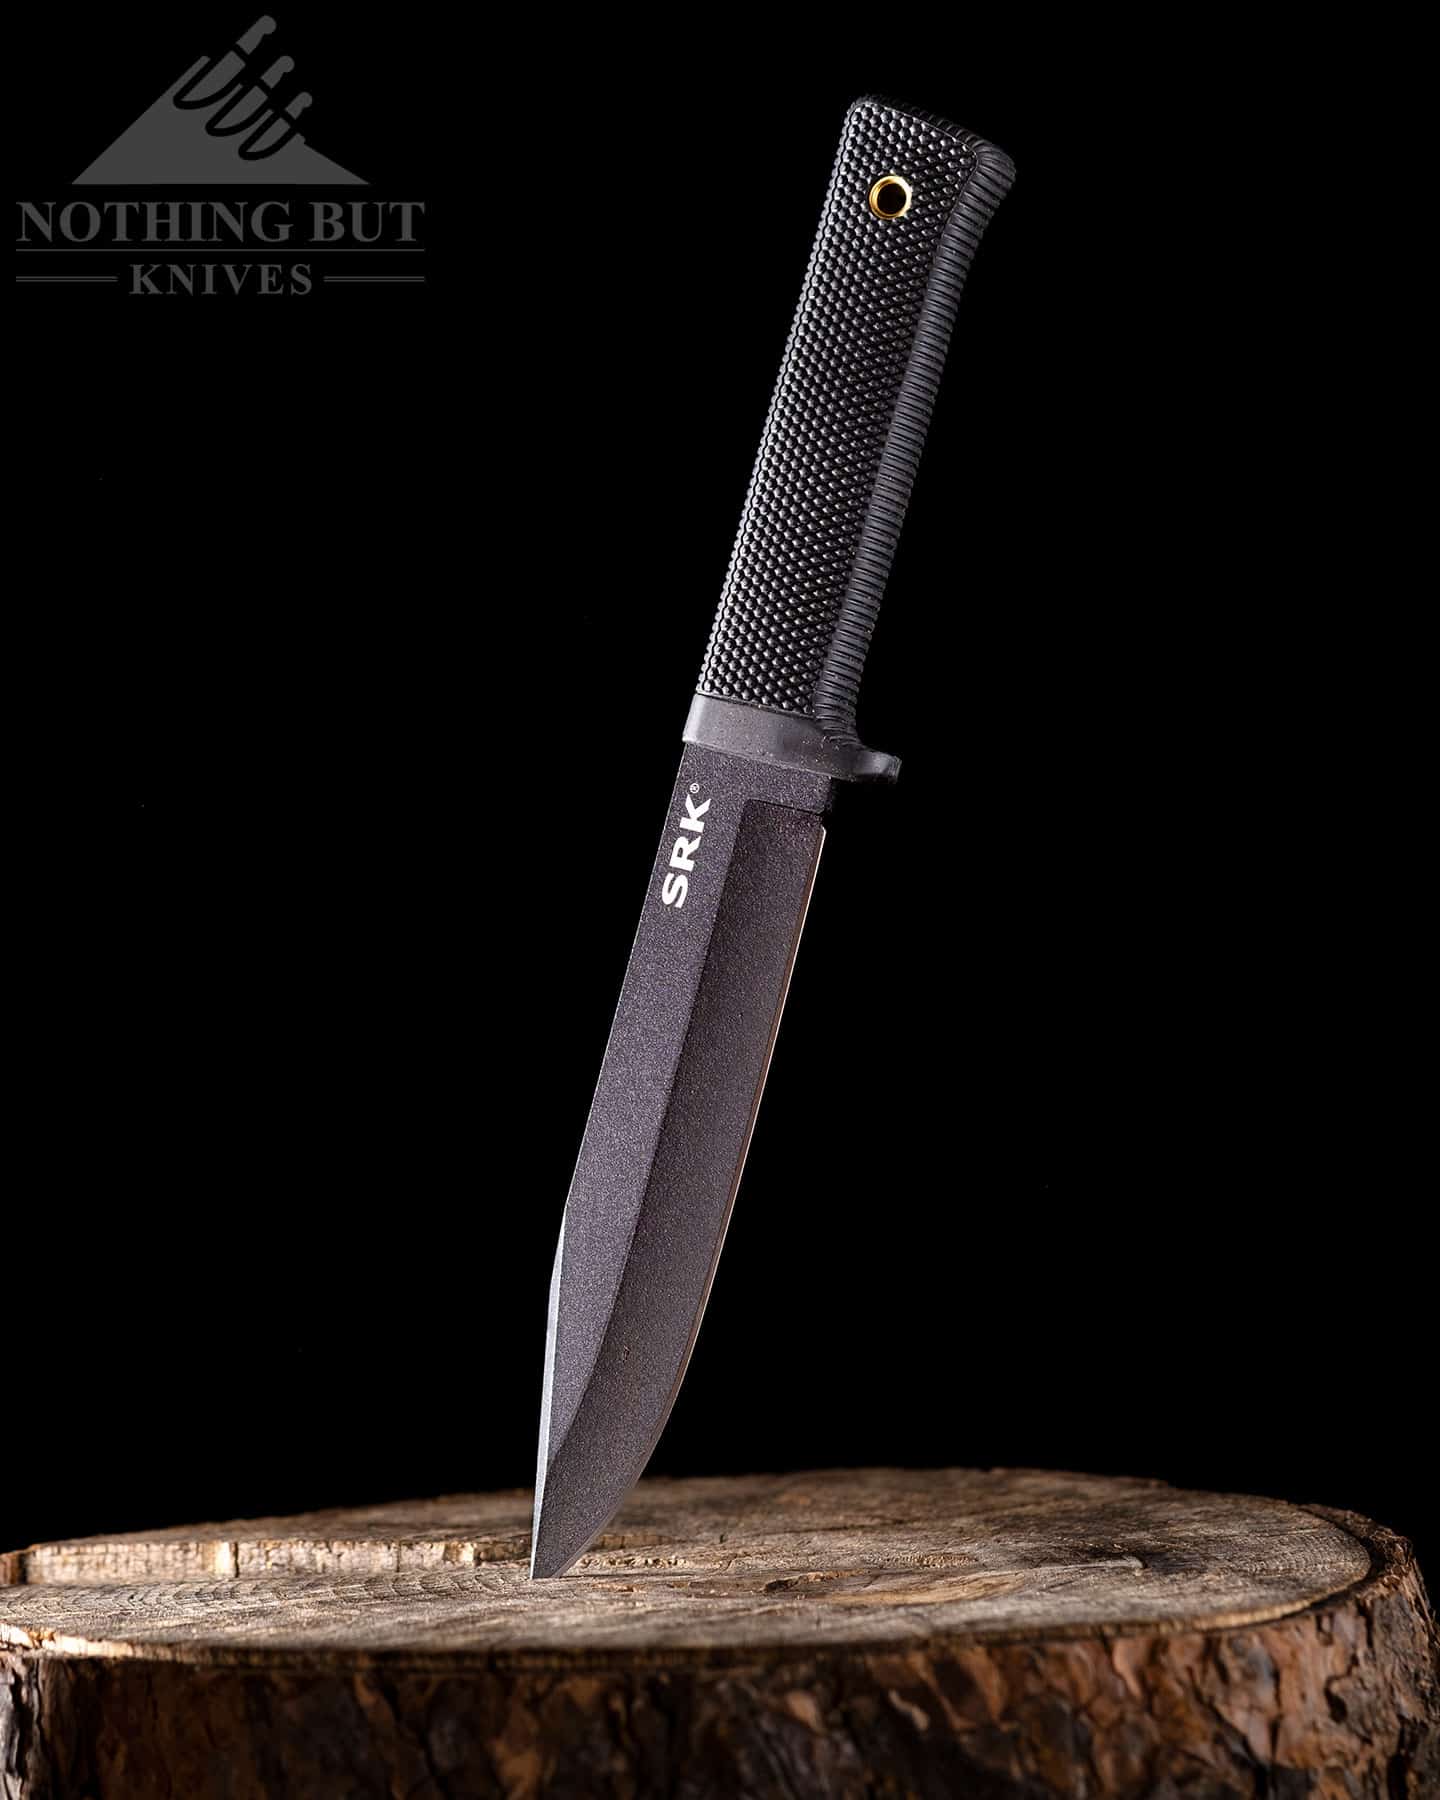 The Buck SRK is a favorite tactical knife of the military and survival enthusiasts. 